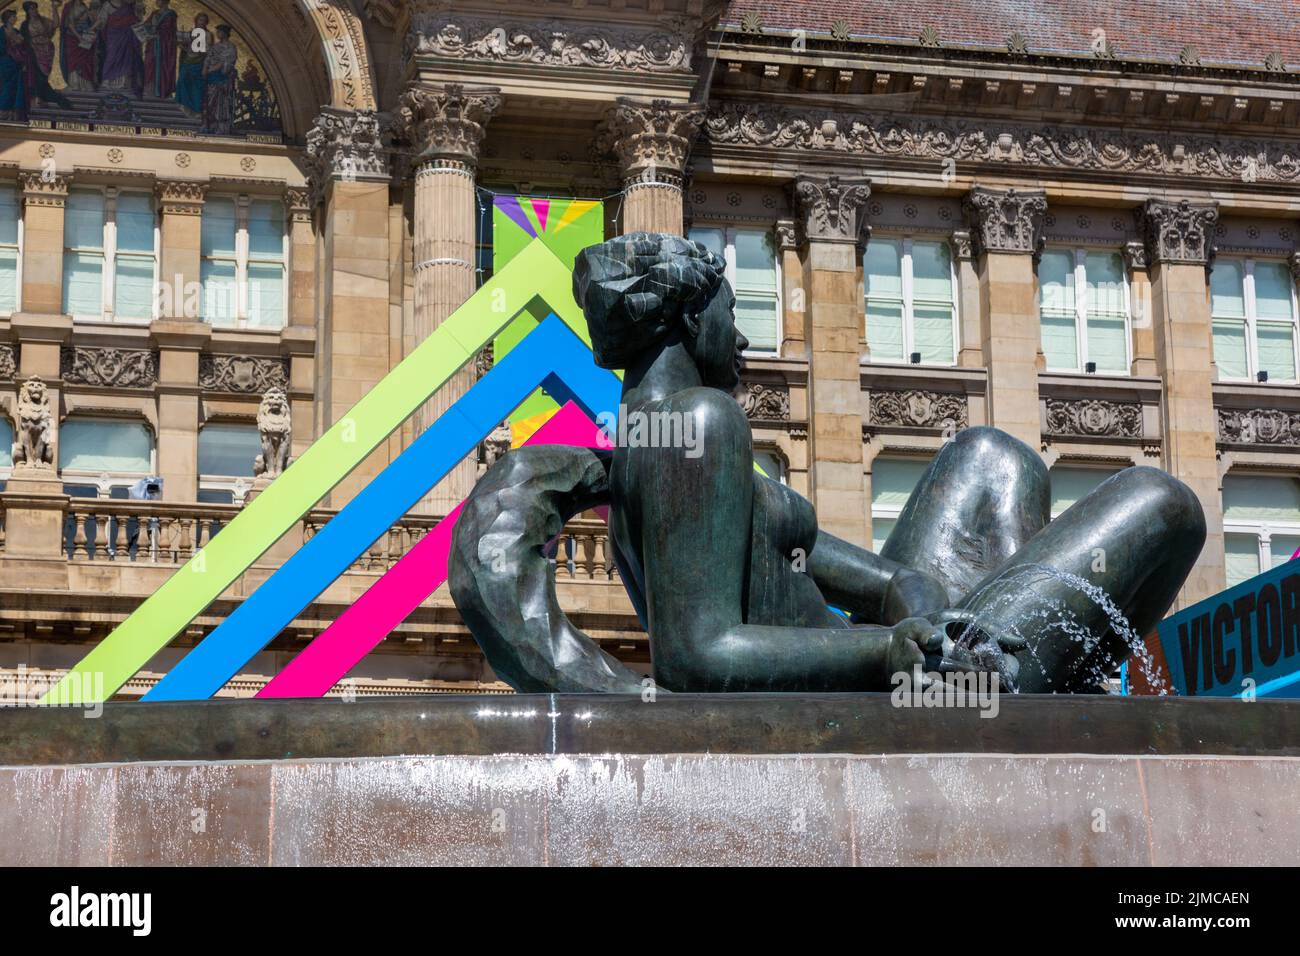 Birmingham's famous Floozie in the Jacuzzi, The River by artist Dhruva Mistry and fountains during the Commonwealth Games in Birmingham 202, UK Stock Photo